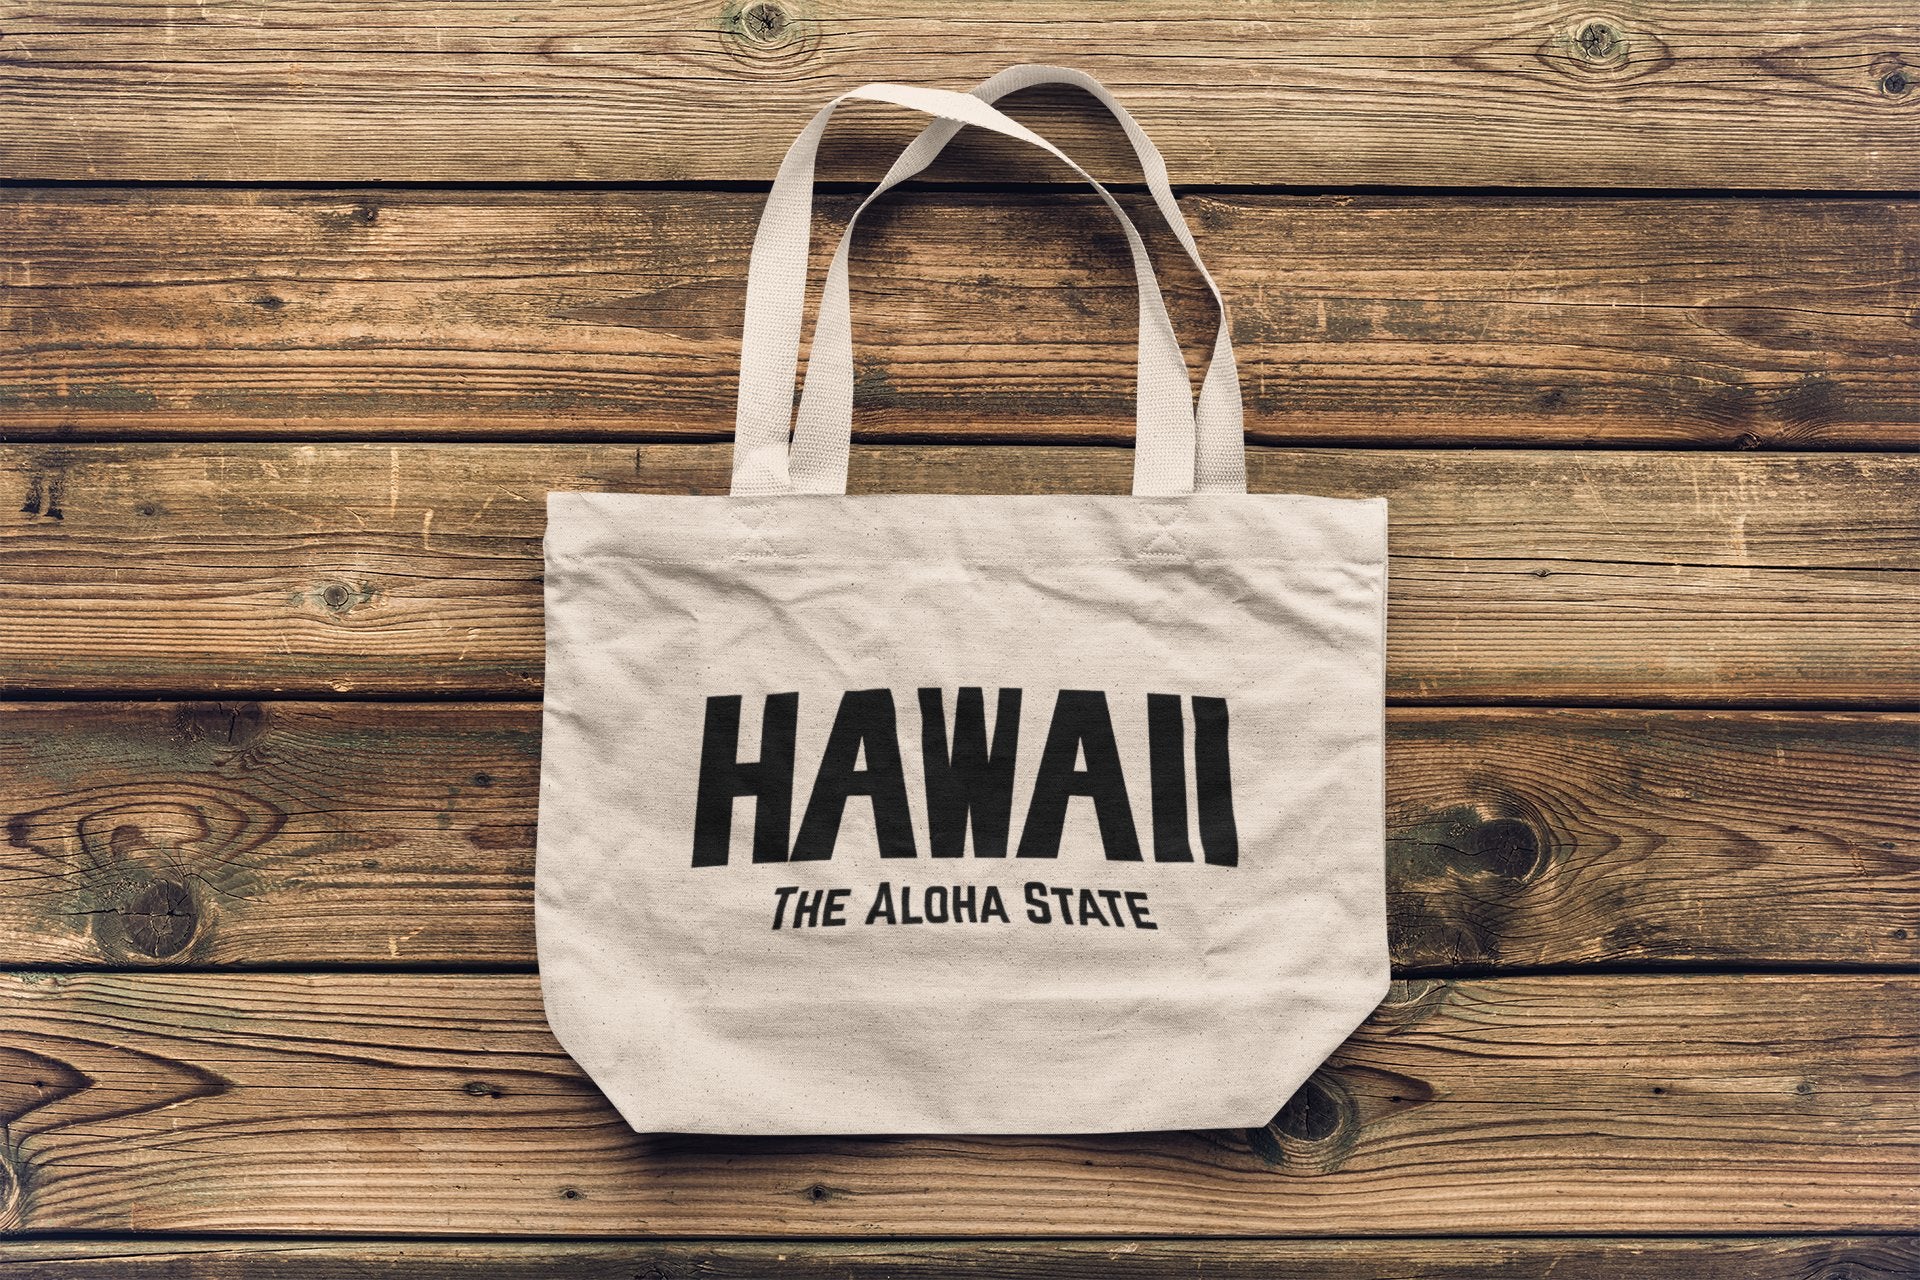 Hawaii Jumbo Tote Vintage Style Retro City Cotton Canvas Tote Bags